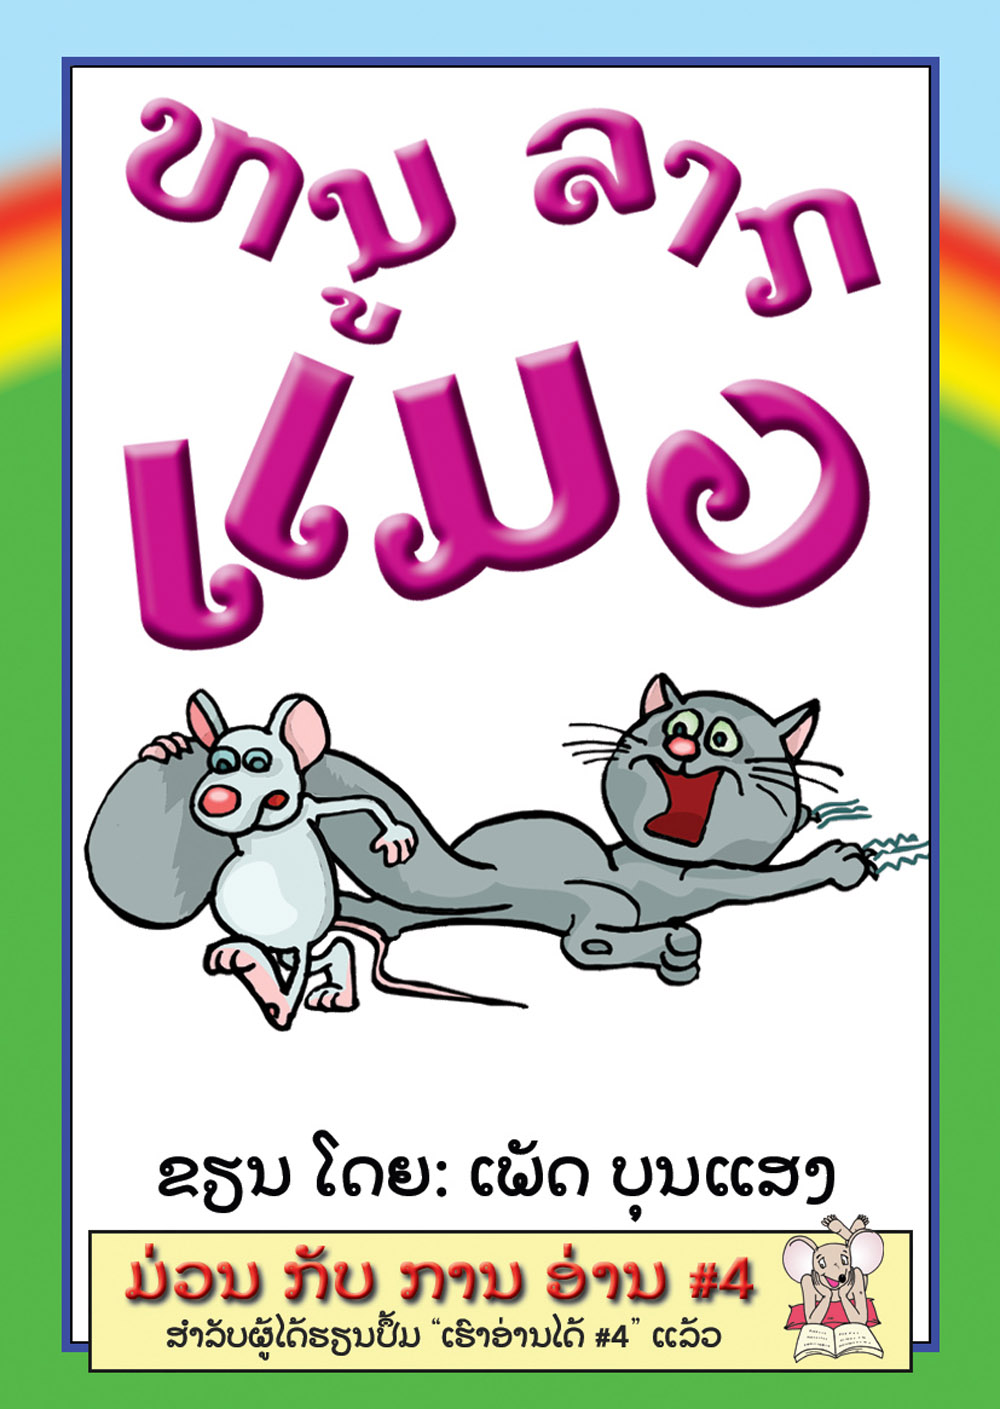 The Mouse Drags the Cat large book cover, published in Lao language